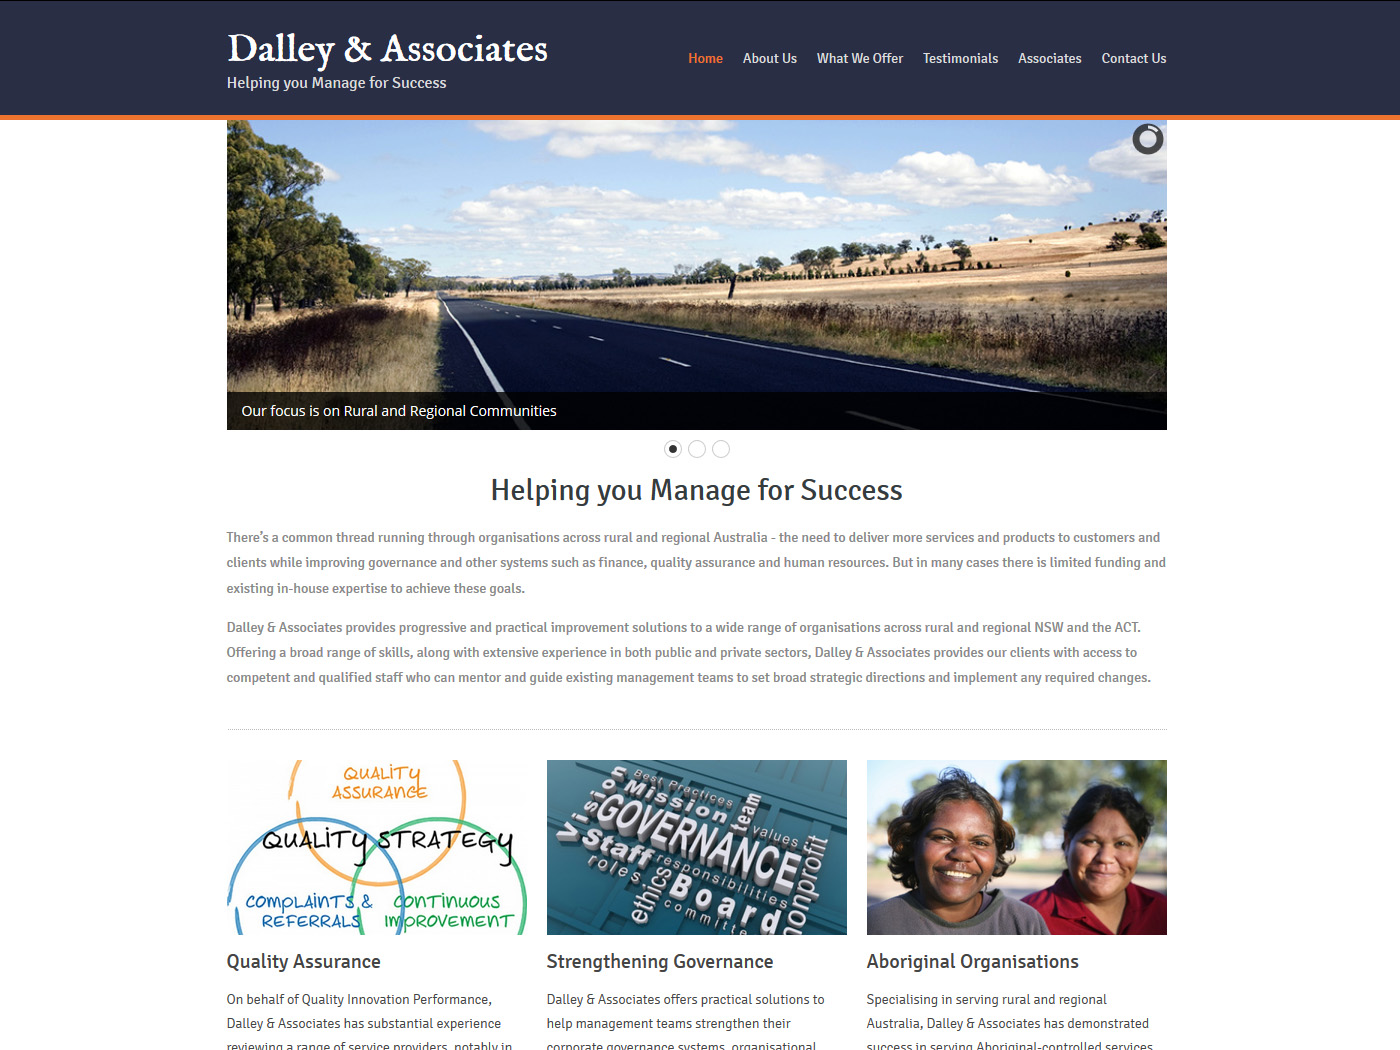 Dalley and Associates (Praxis Interactive)